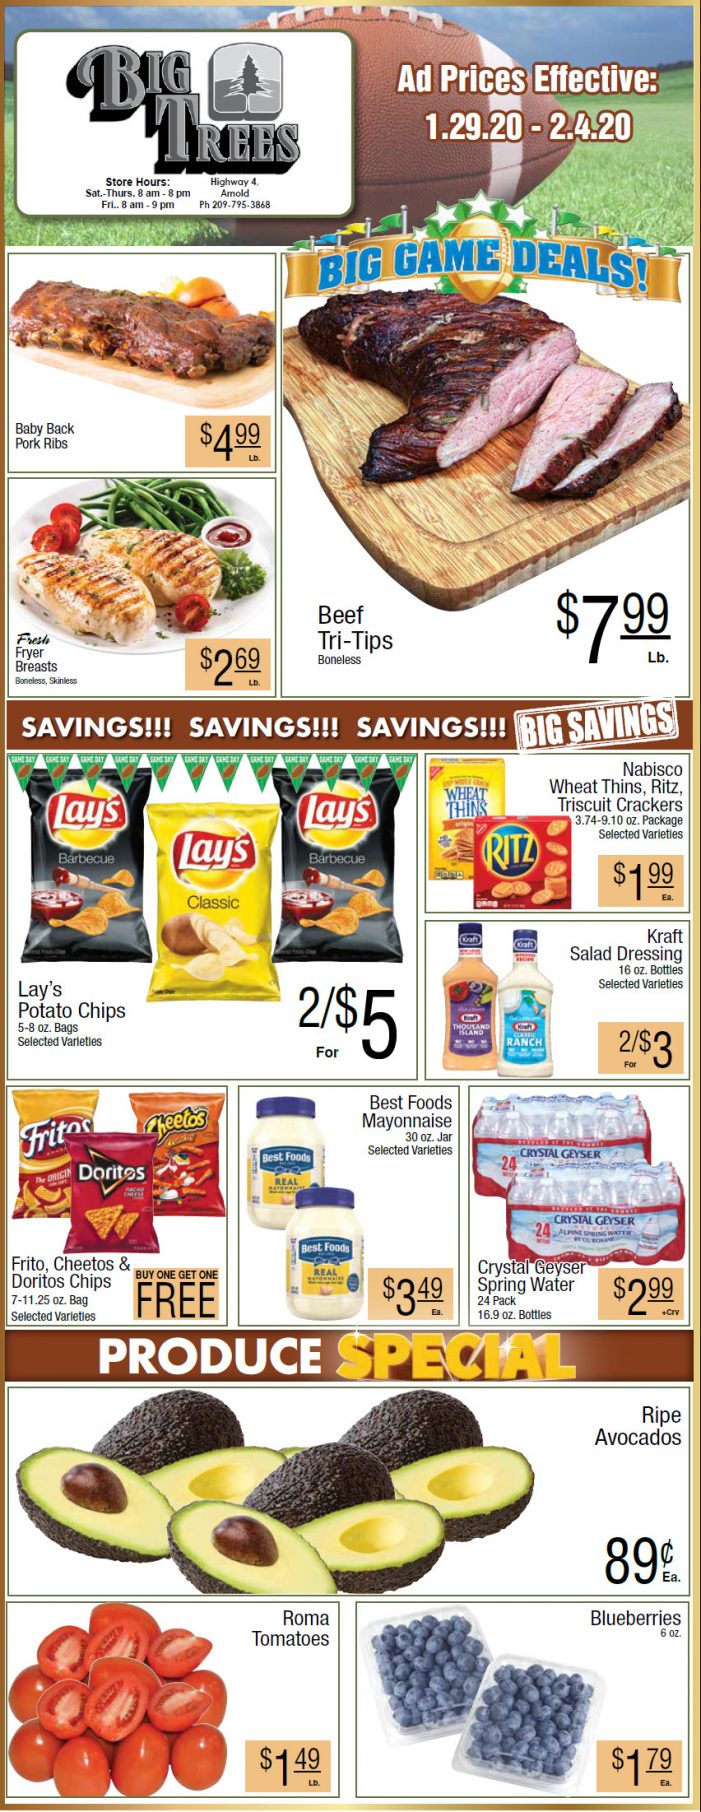 Big Trees Market Weekly Ad & Grocery Specials Through February 4th